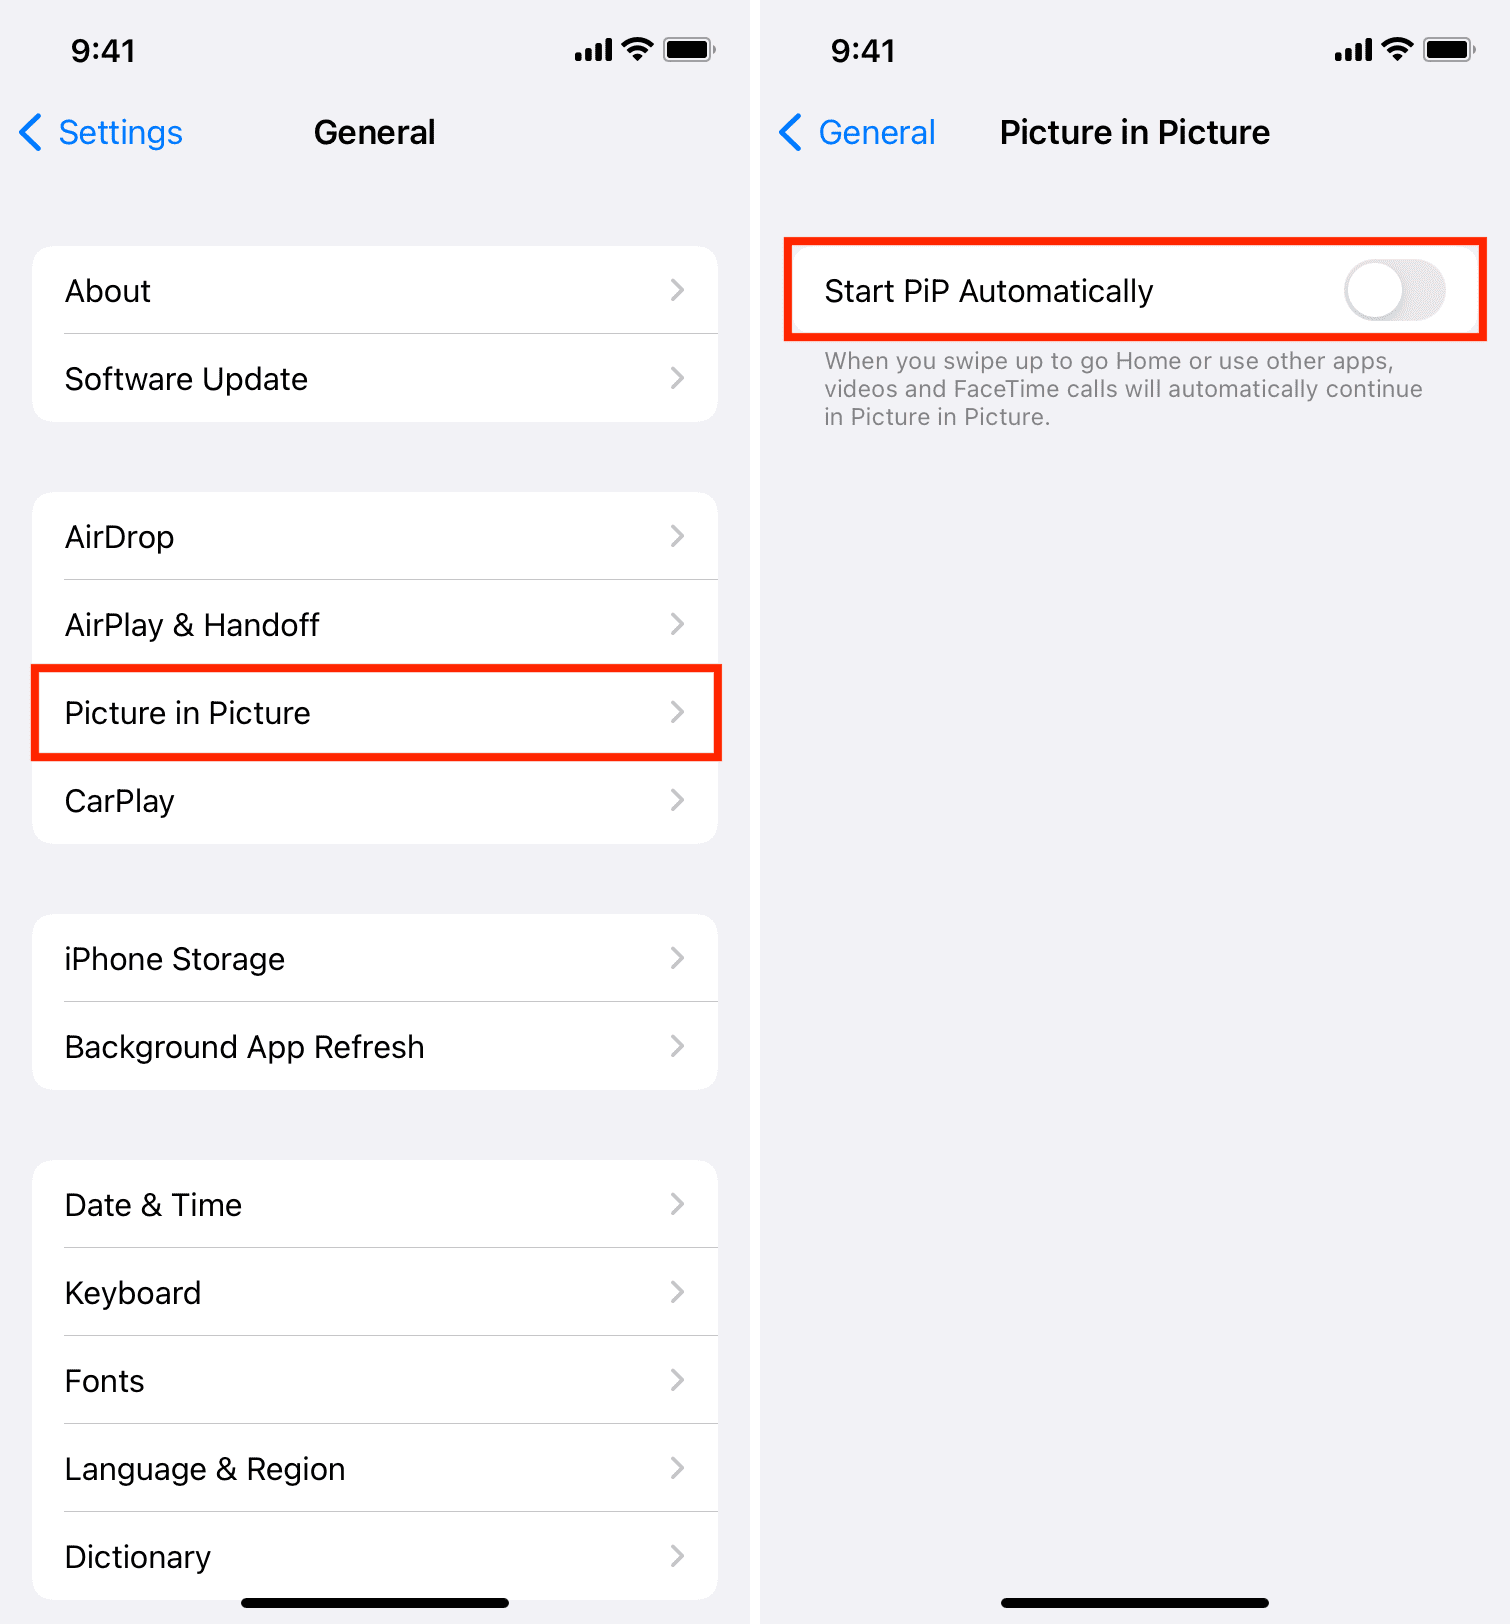 Turn off Start PiP Automatically on iPhone